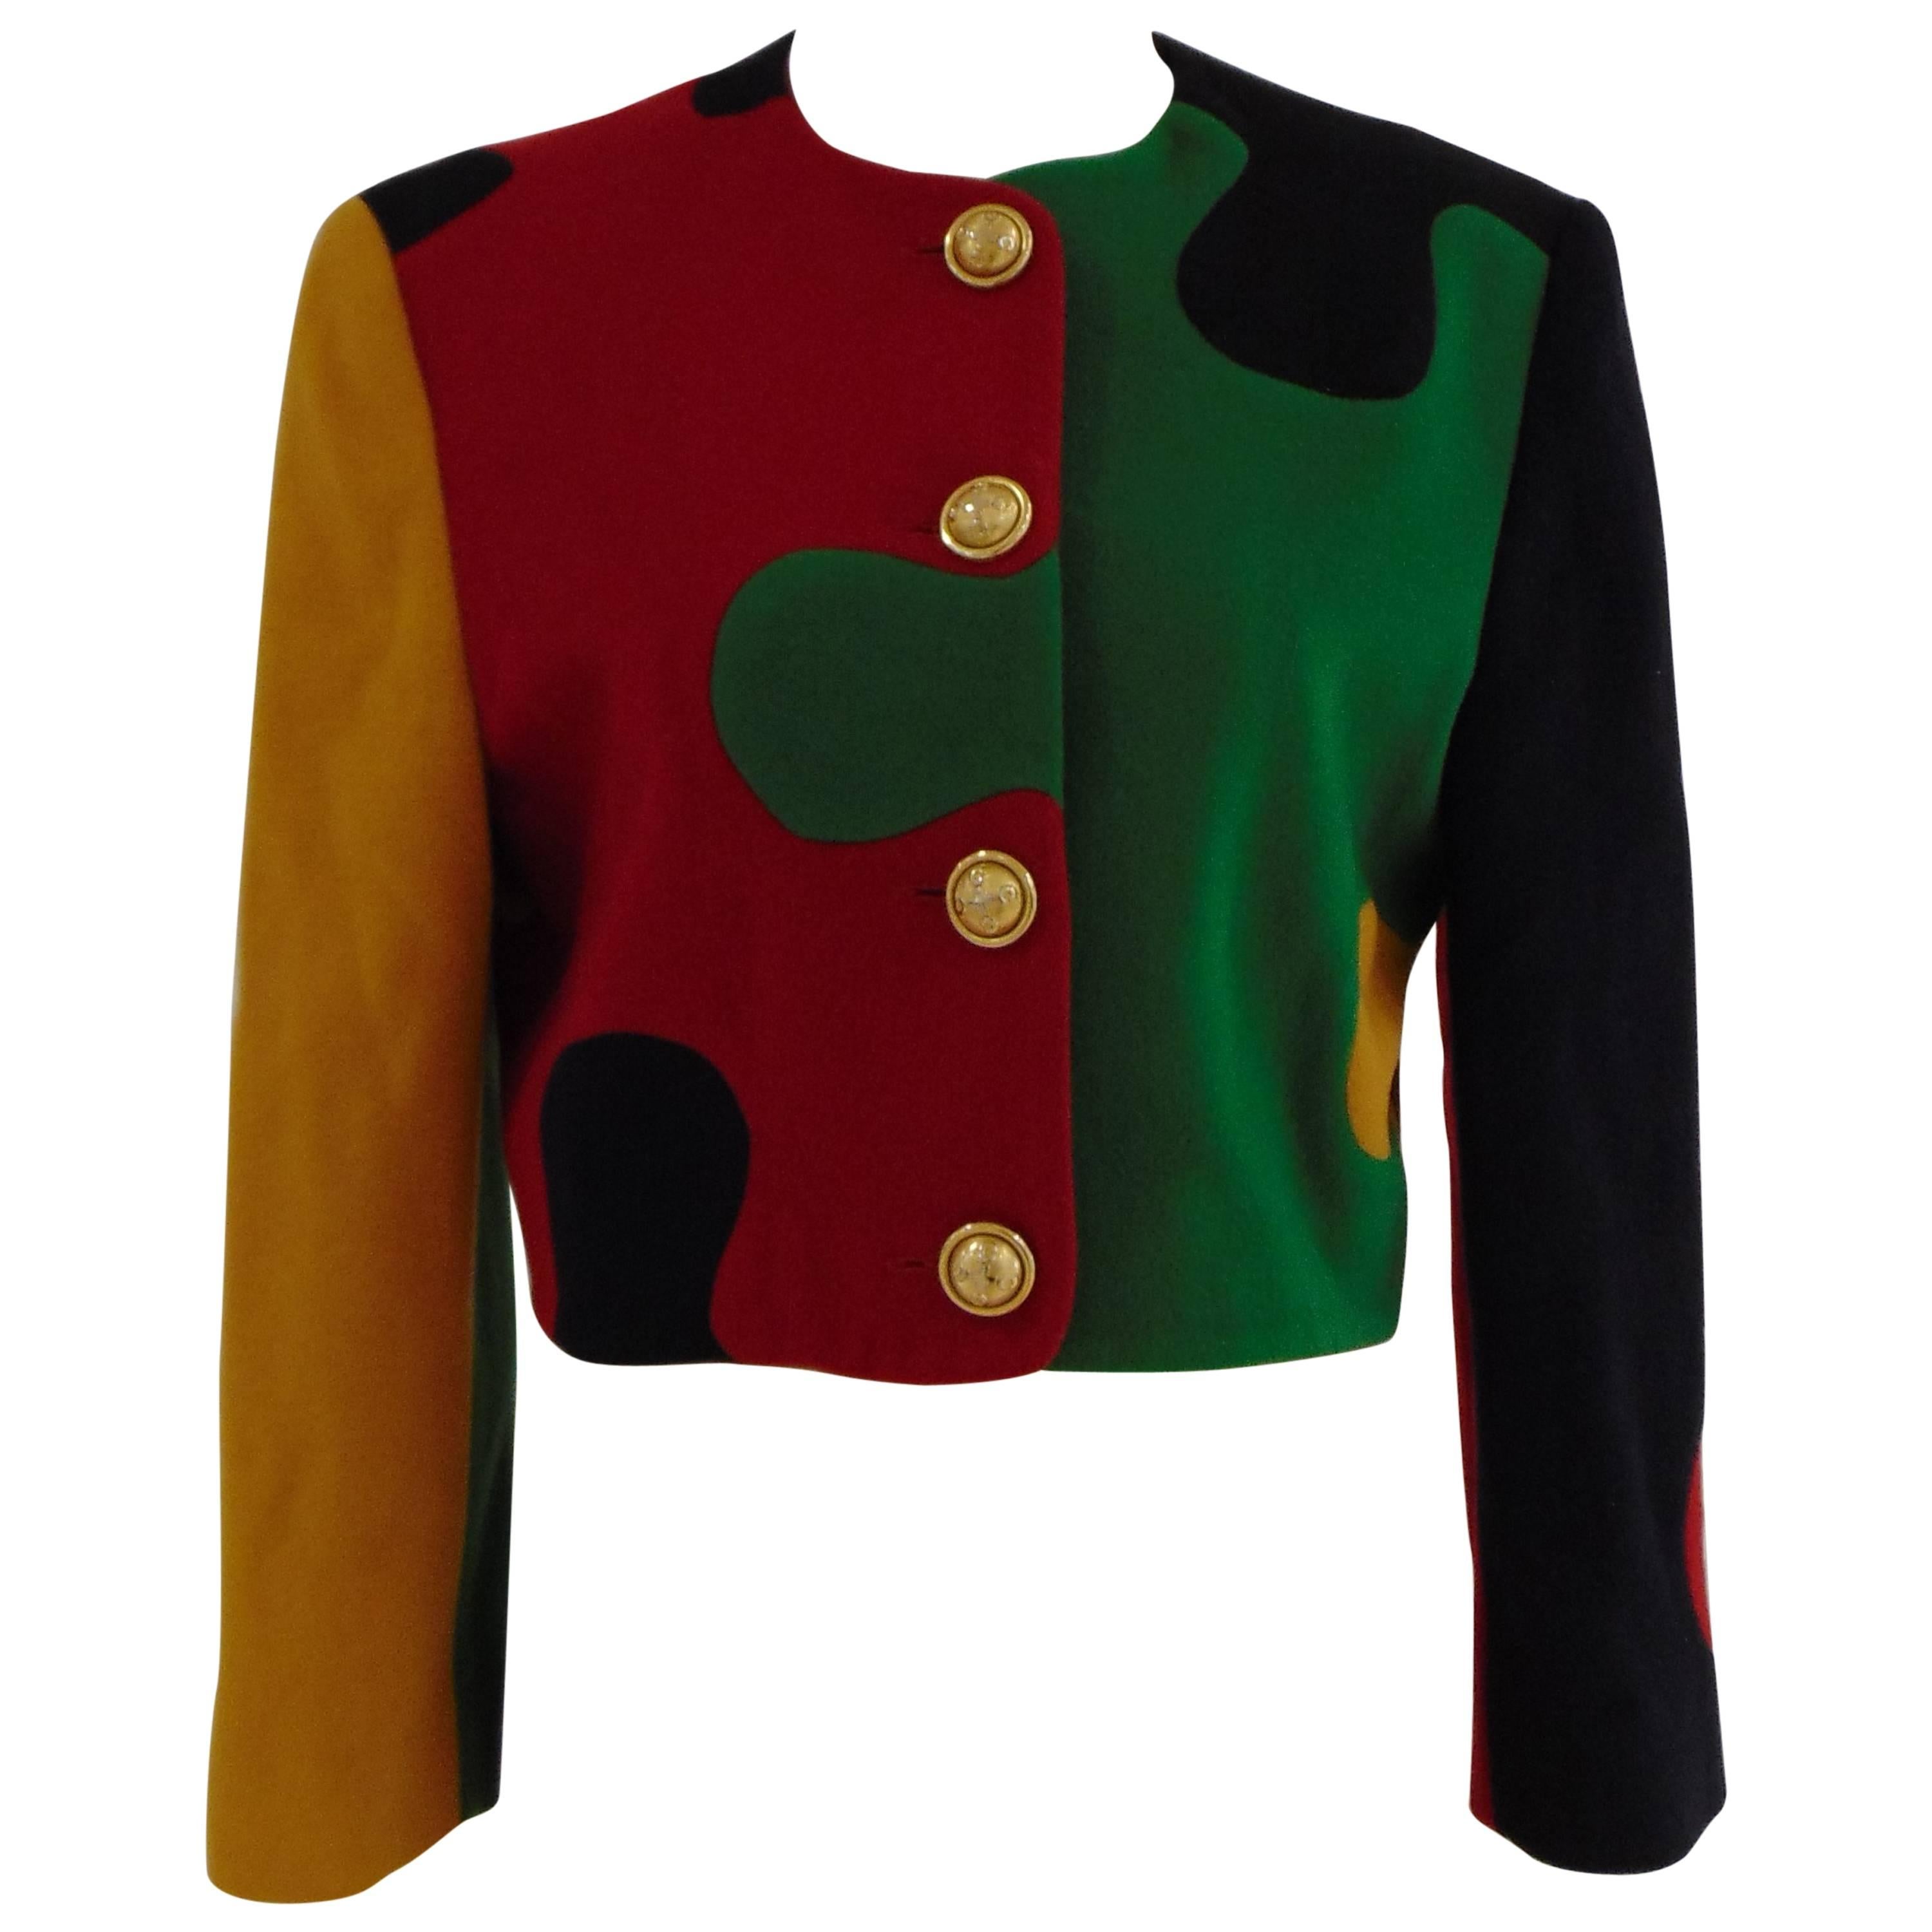 Iconic vintage Franco Moschino Cheap & chic puzzle jacket